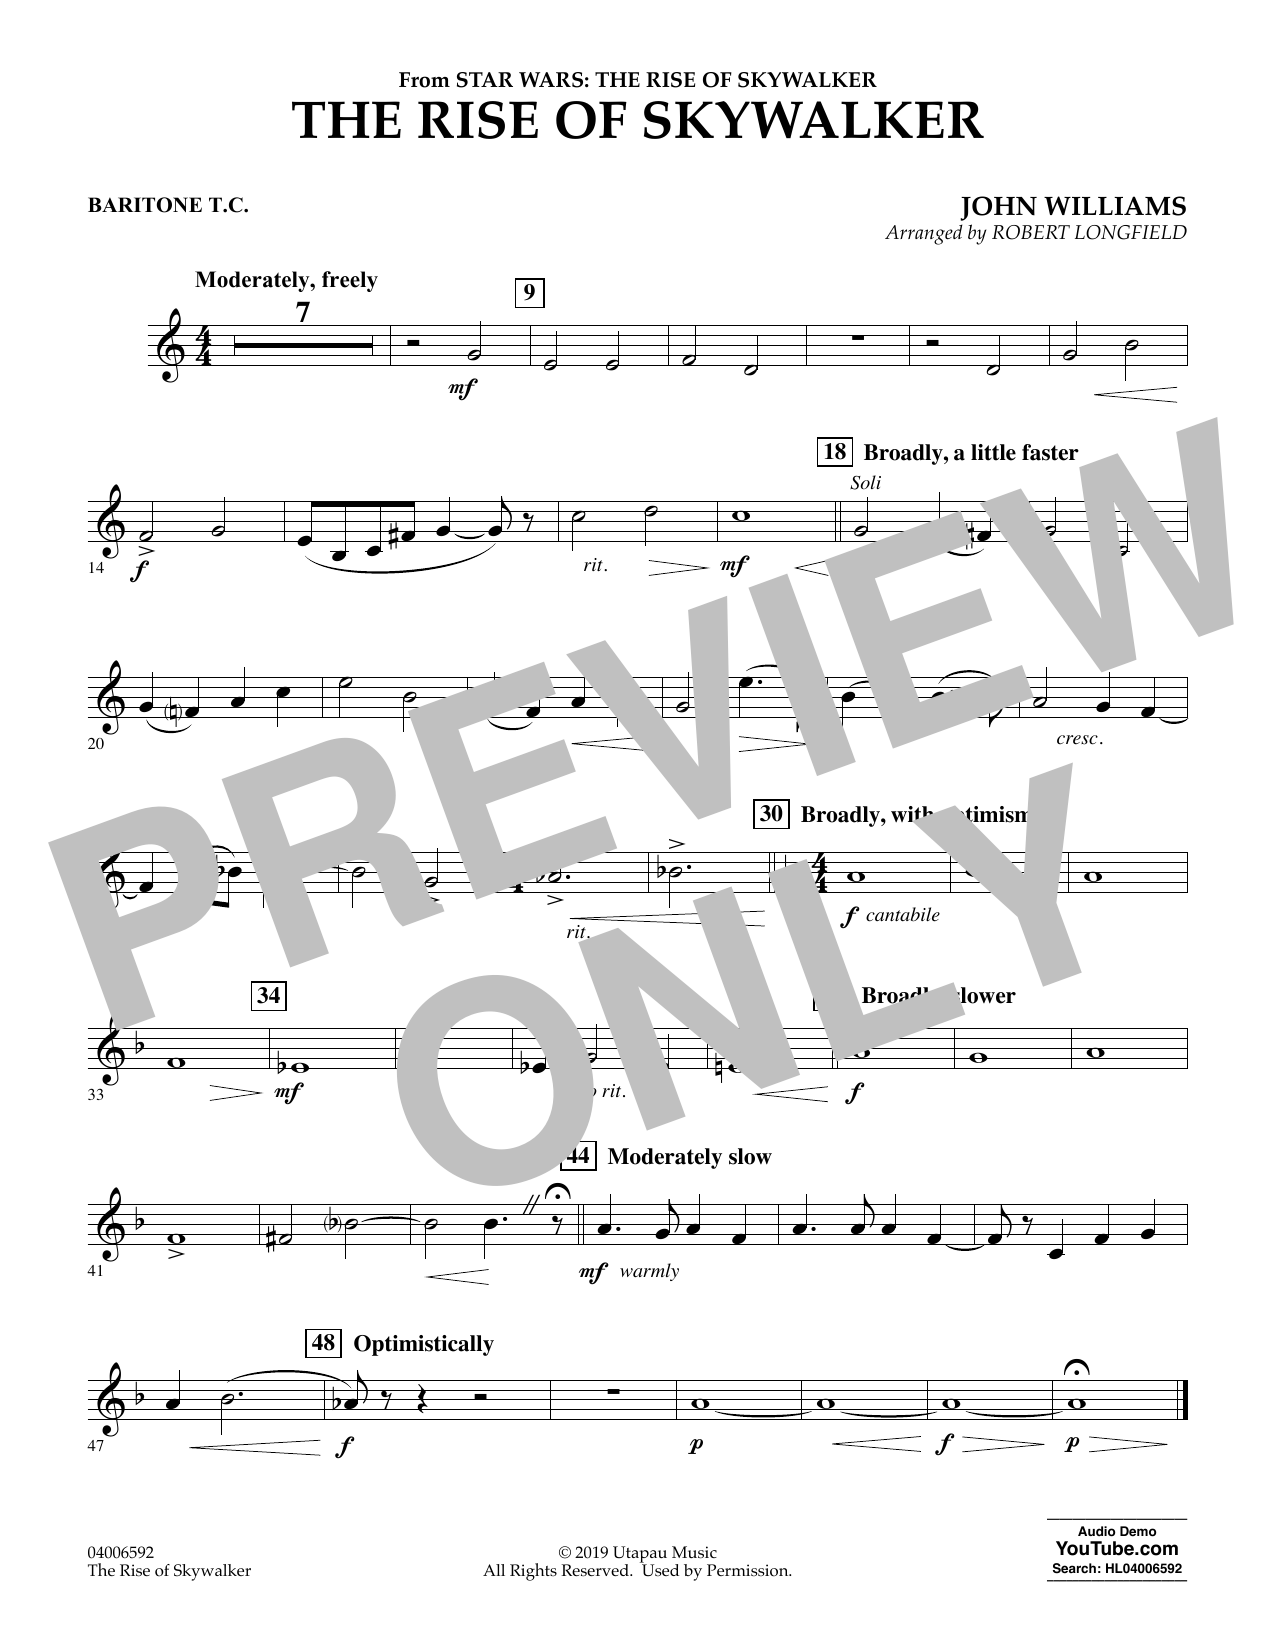 John Williams The Rise of Skywalker (from Star Wars: The Rise of Skywalker) - Baritone T.C. sheet music preview music notes and score for Concert Band including 1 page(s)